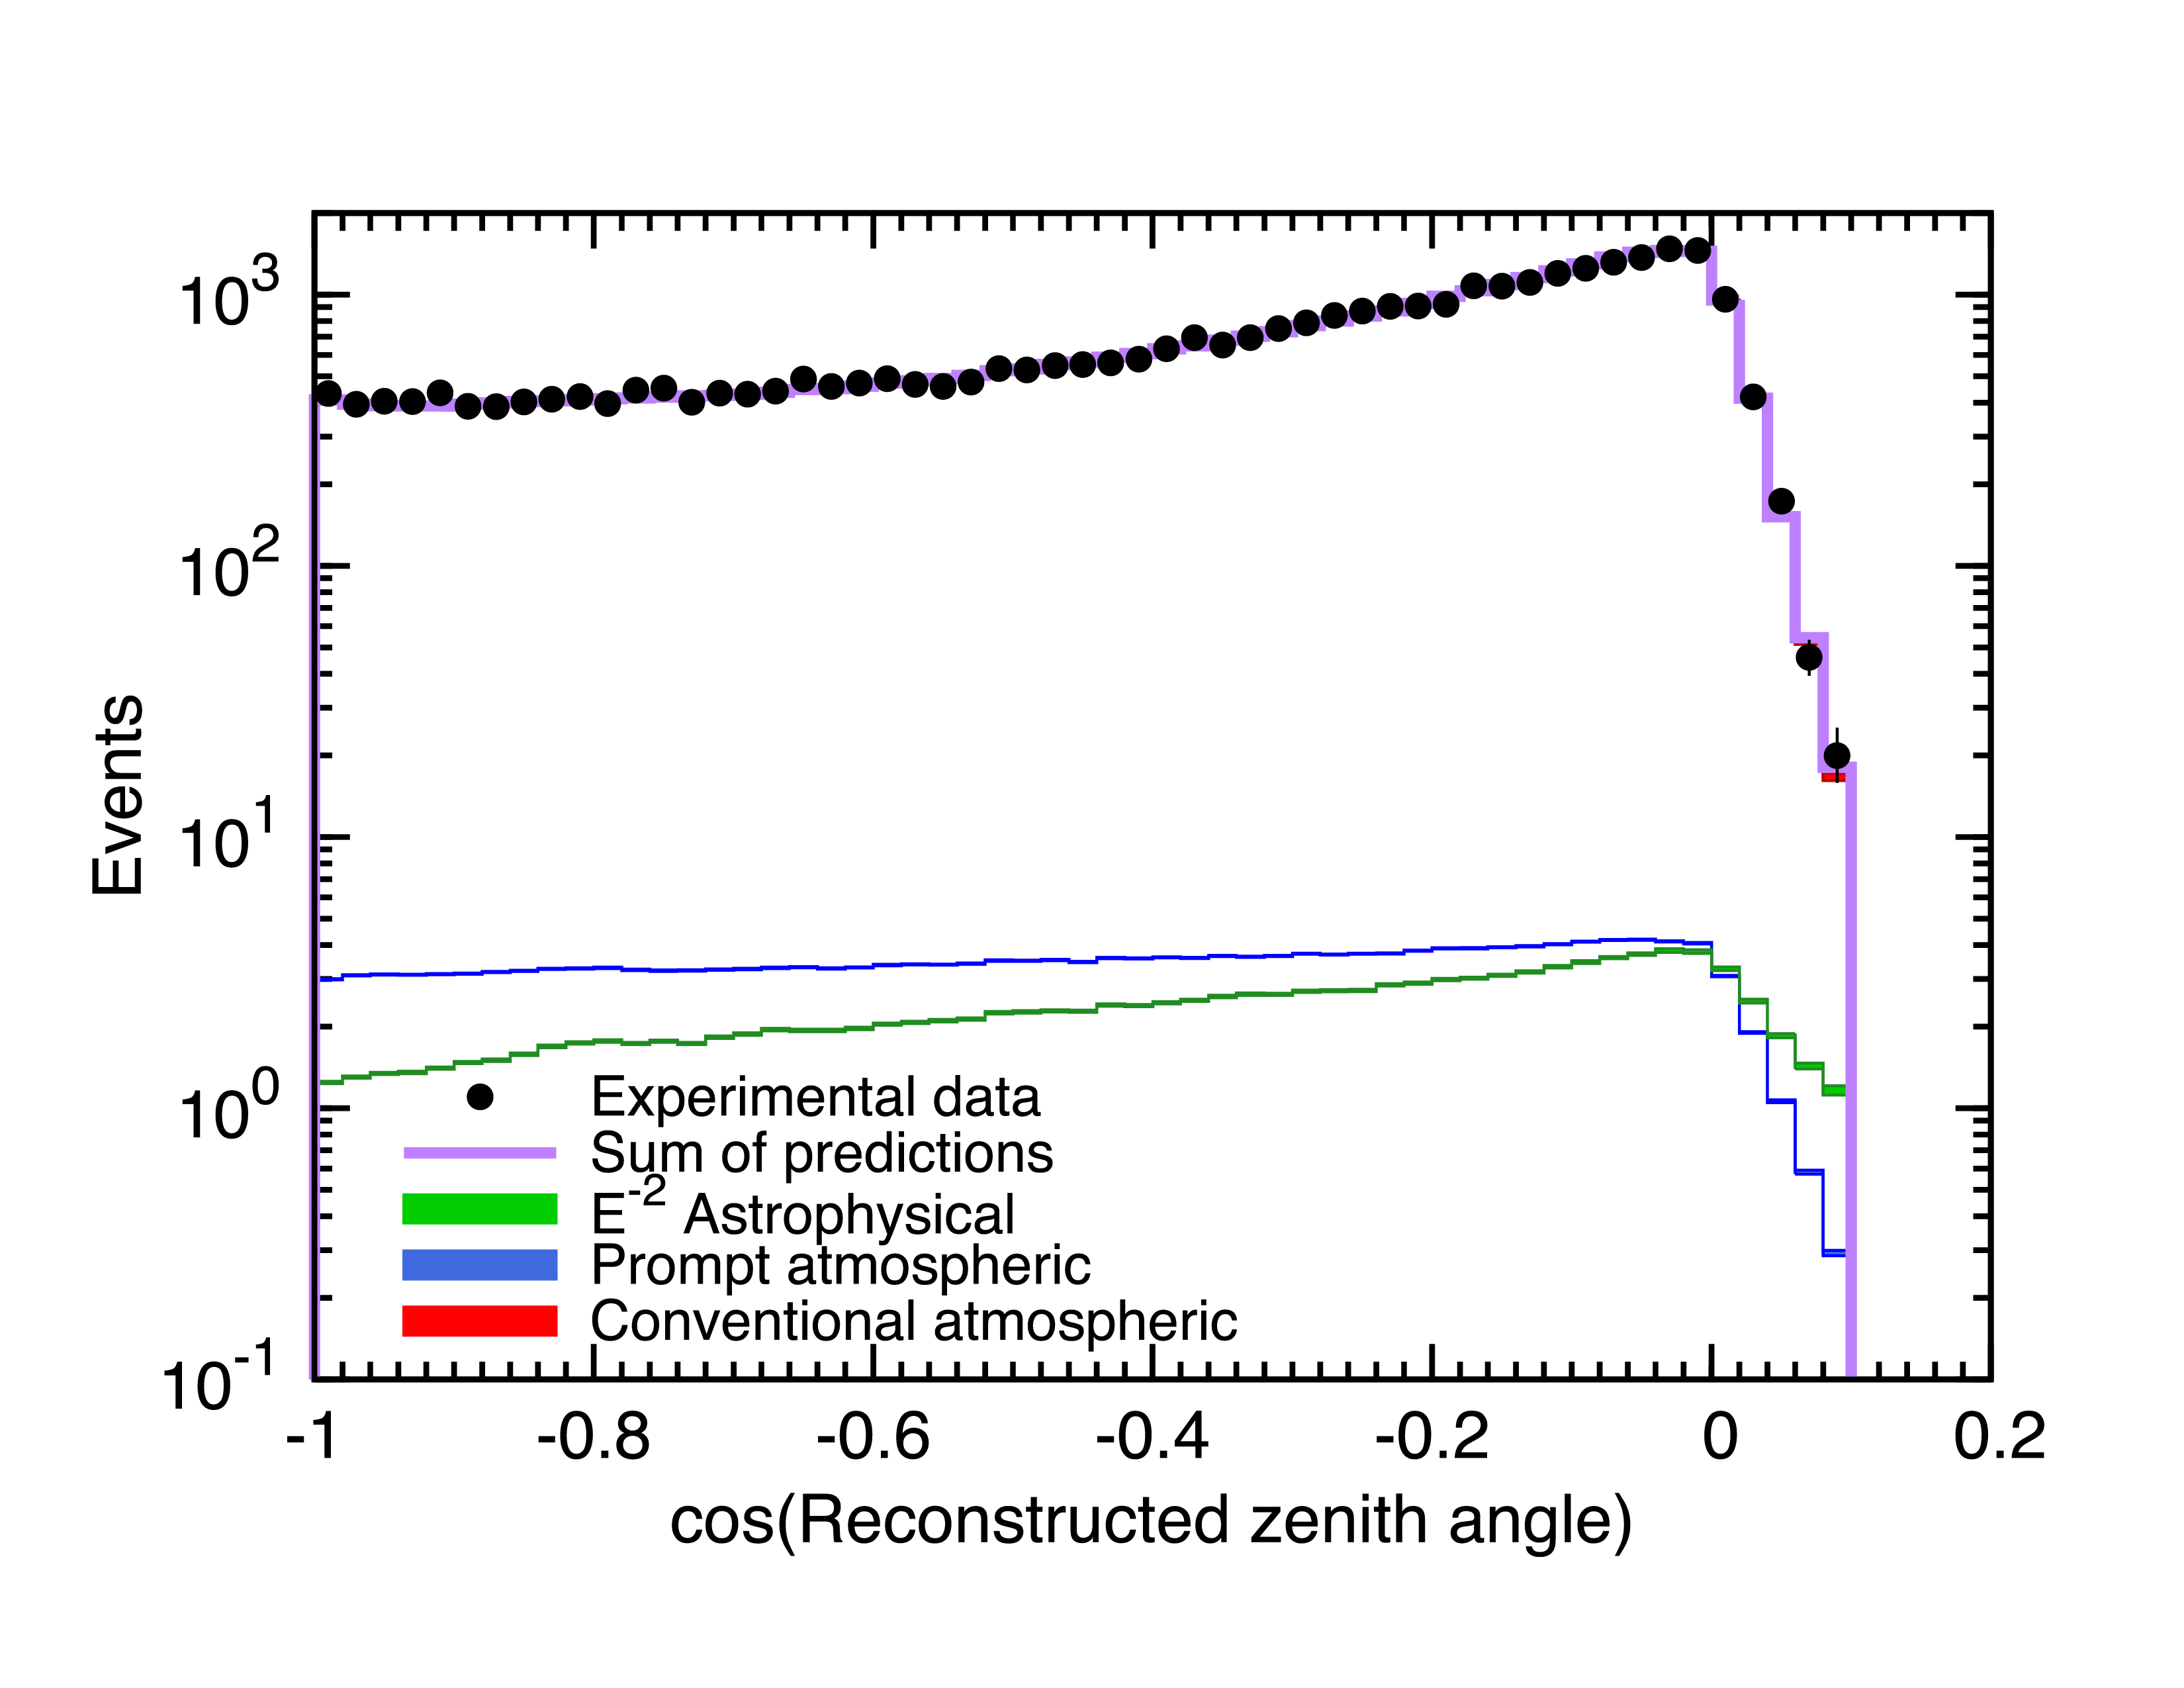 Distribution of the reconstructed zenith angles